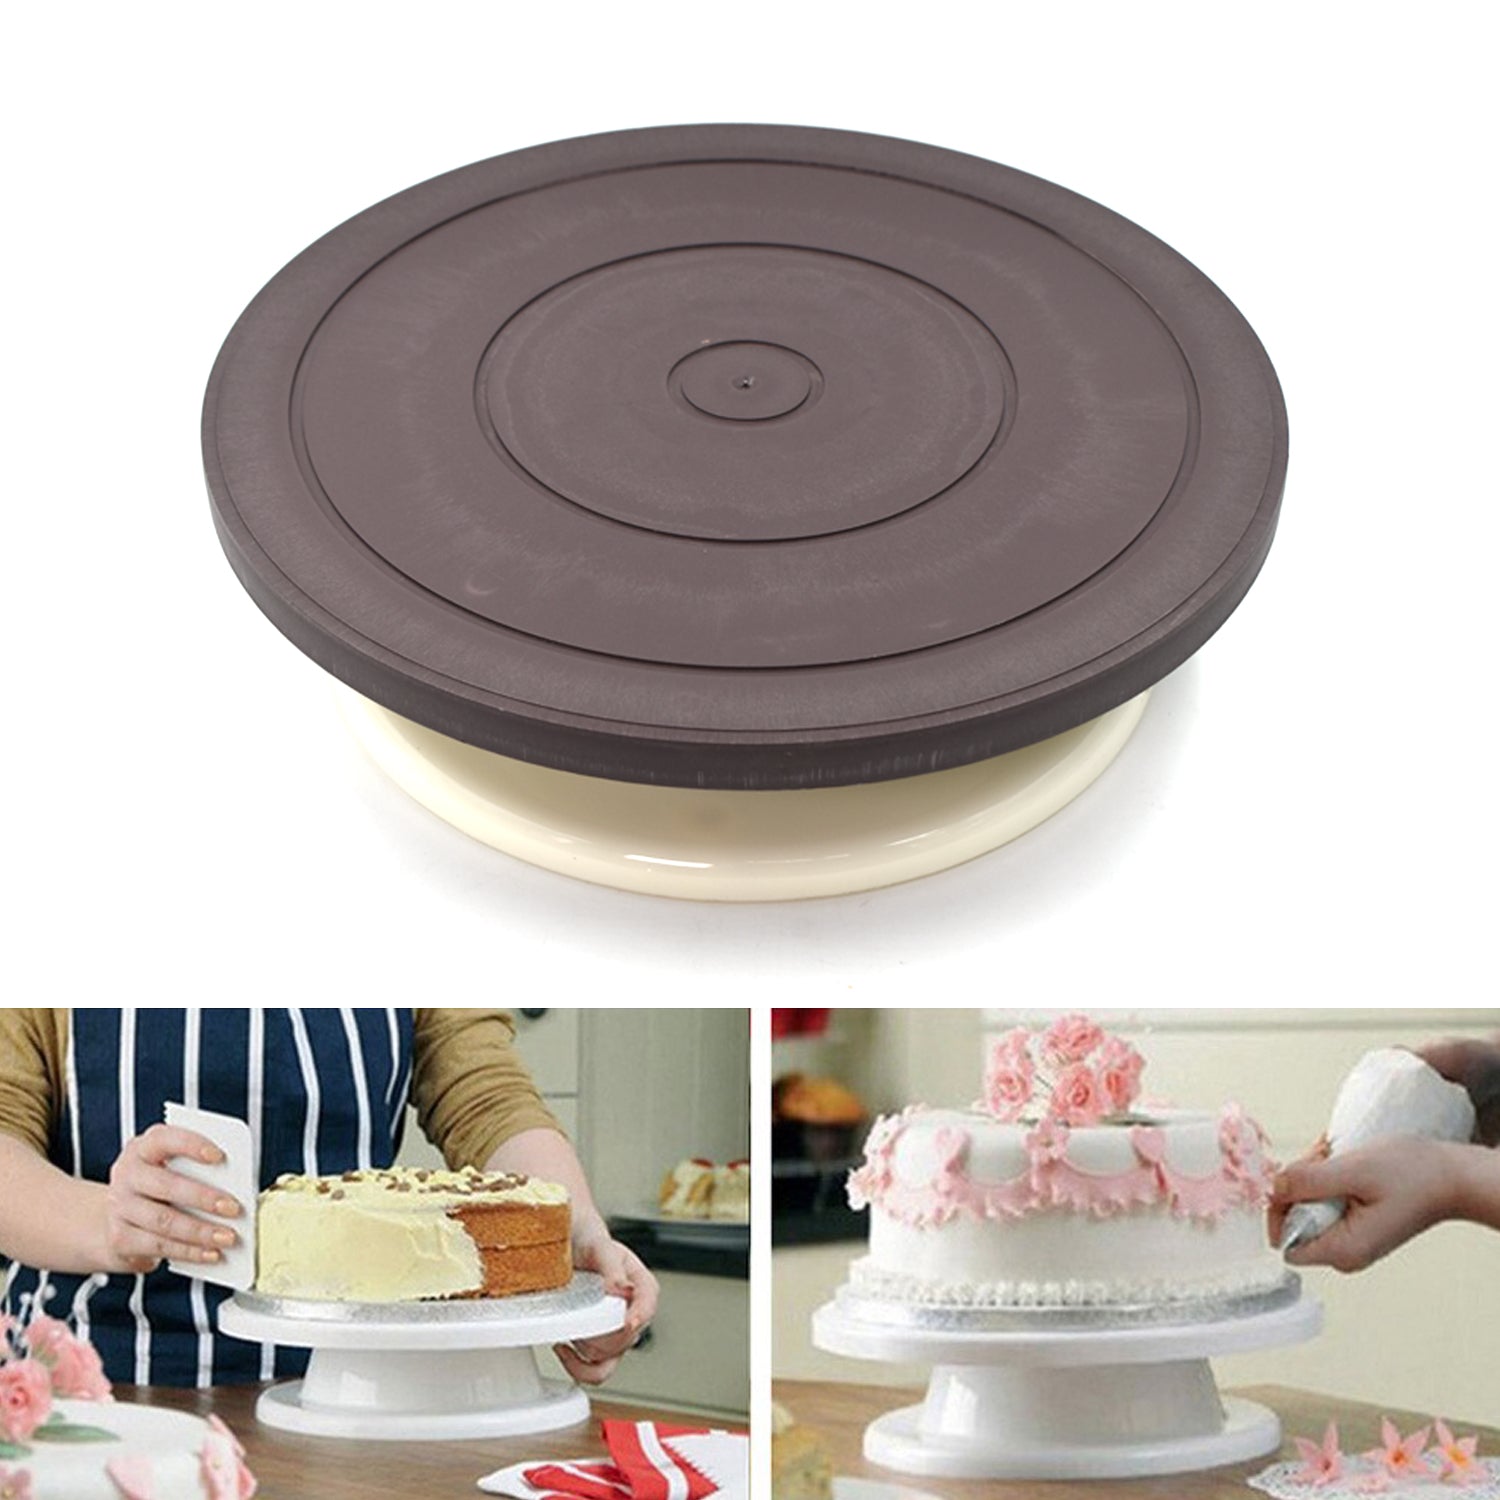 2733 Cake Brown Turntable used widely in bakeries and some of the household places while making and decorating cake and all purposes. freeshipping - DeoDap